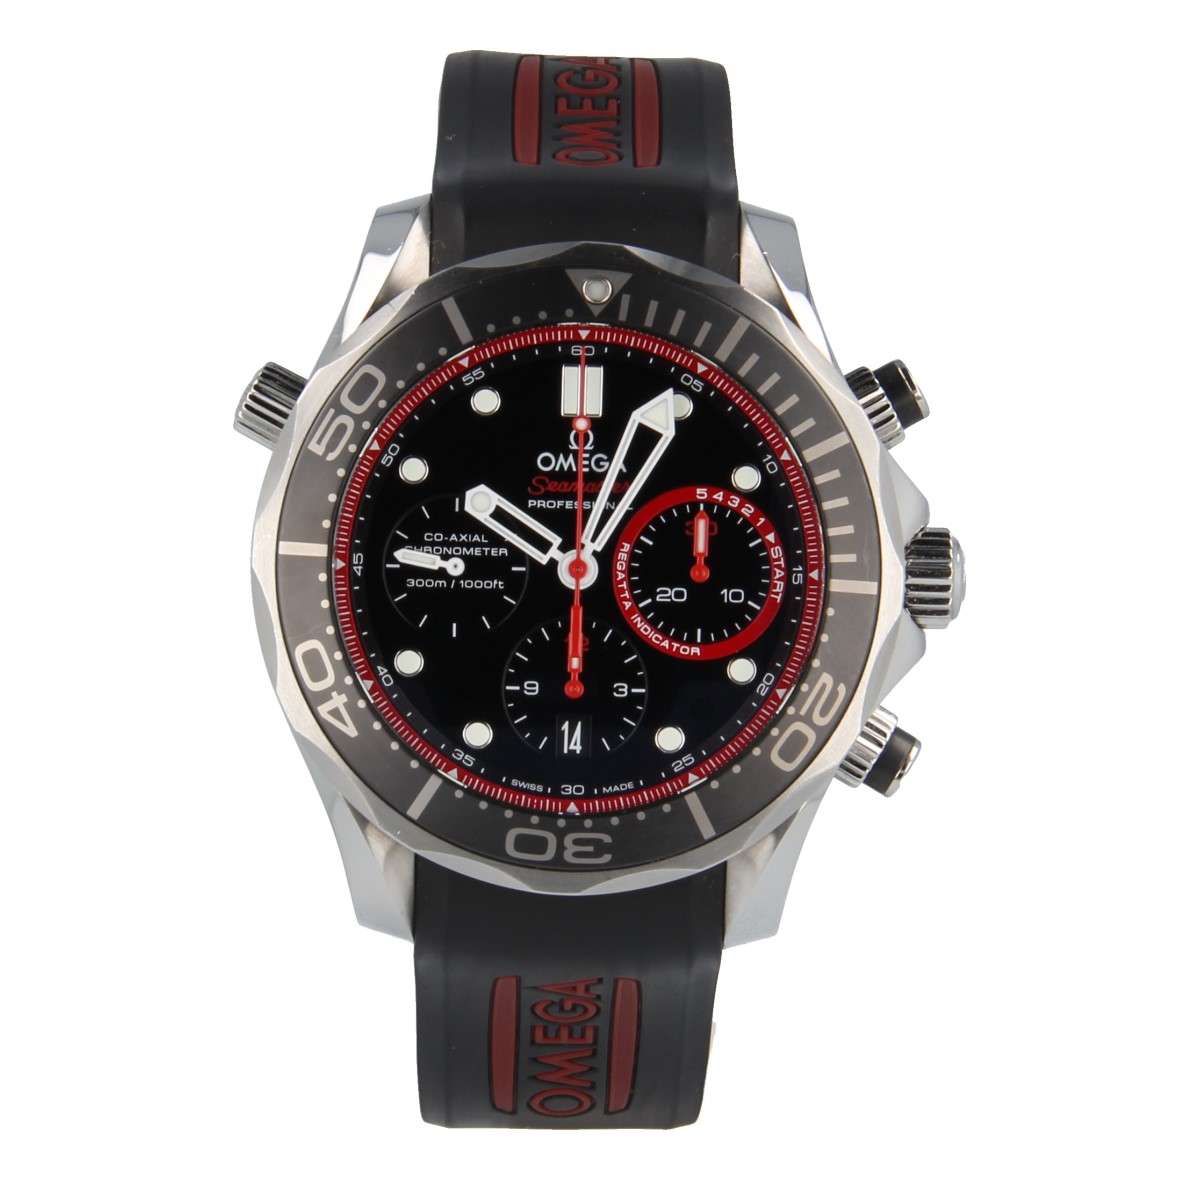 Omega marks a year to the America's Cup with Seamaster Planet Ocean for  Emirates Team New Zealand